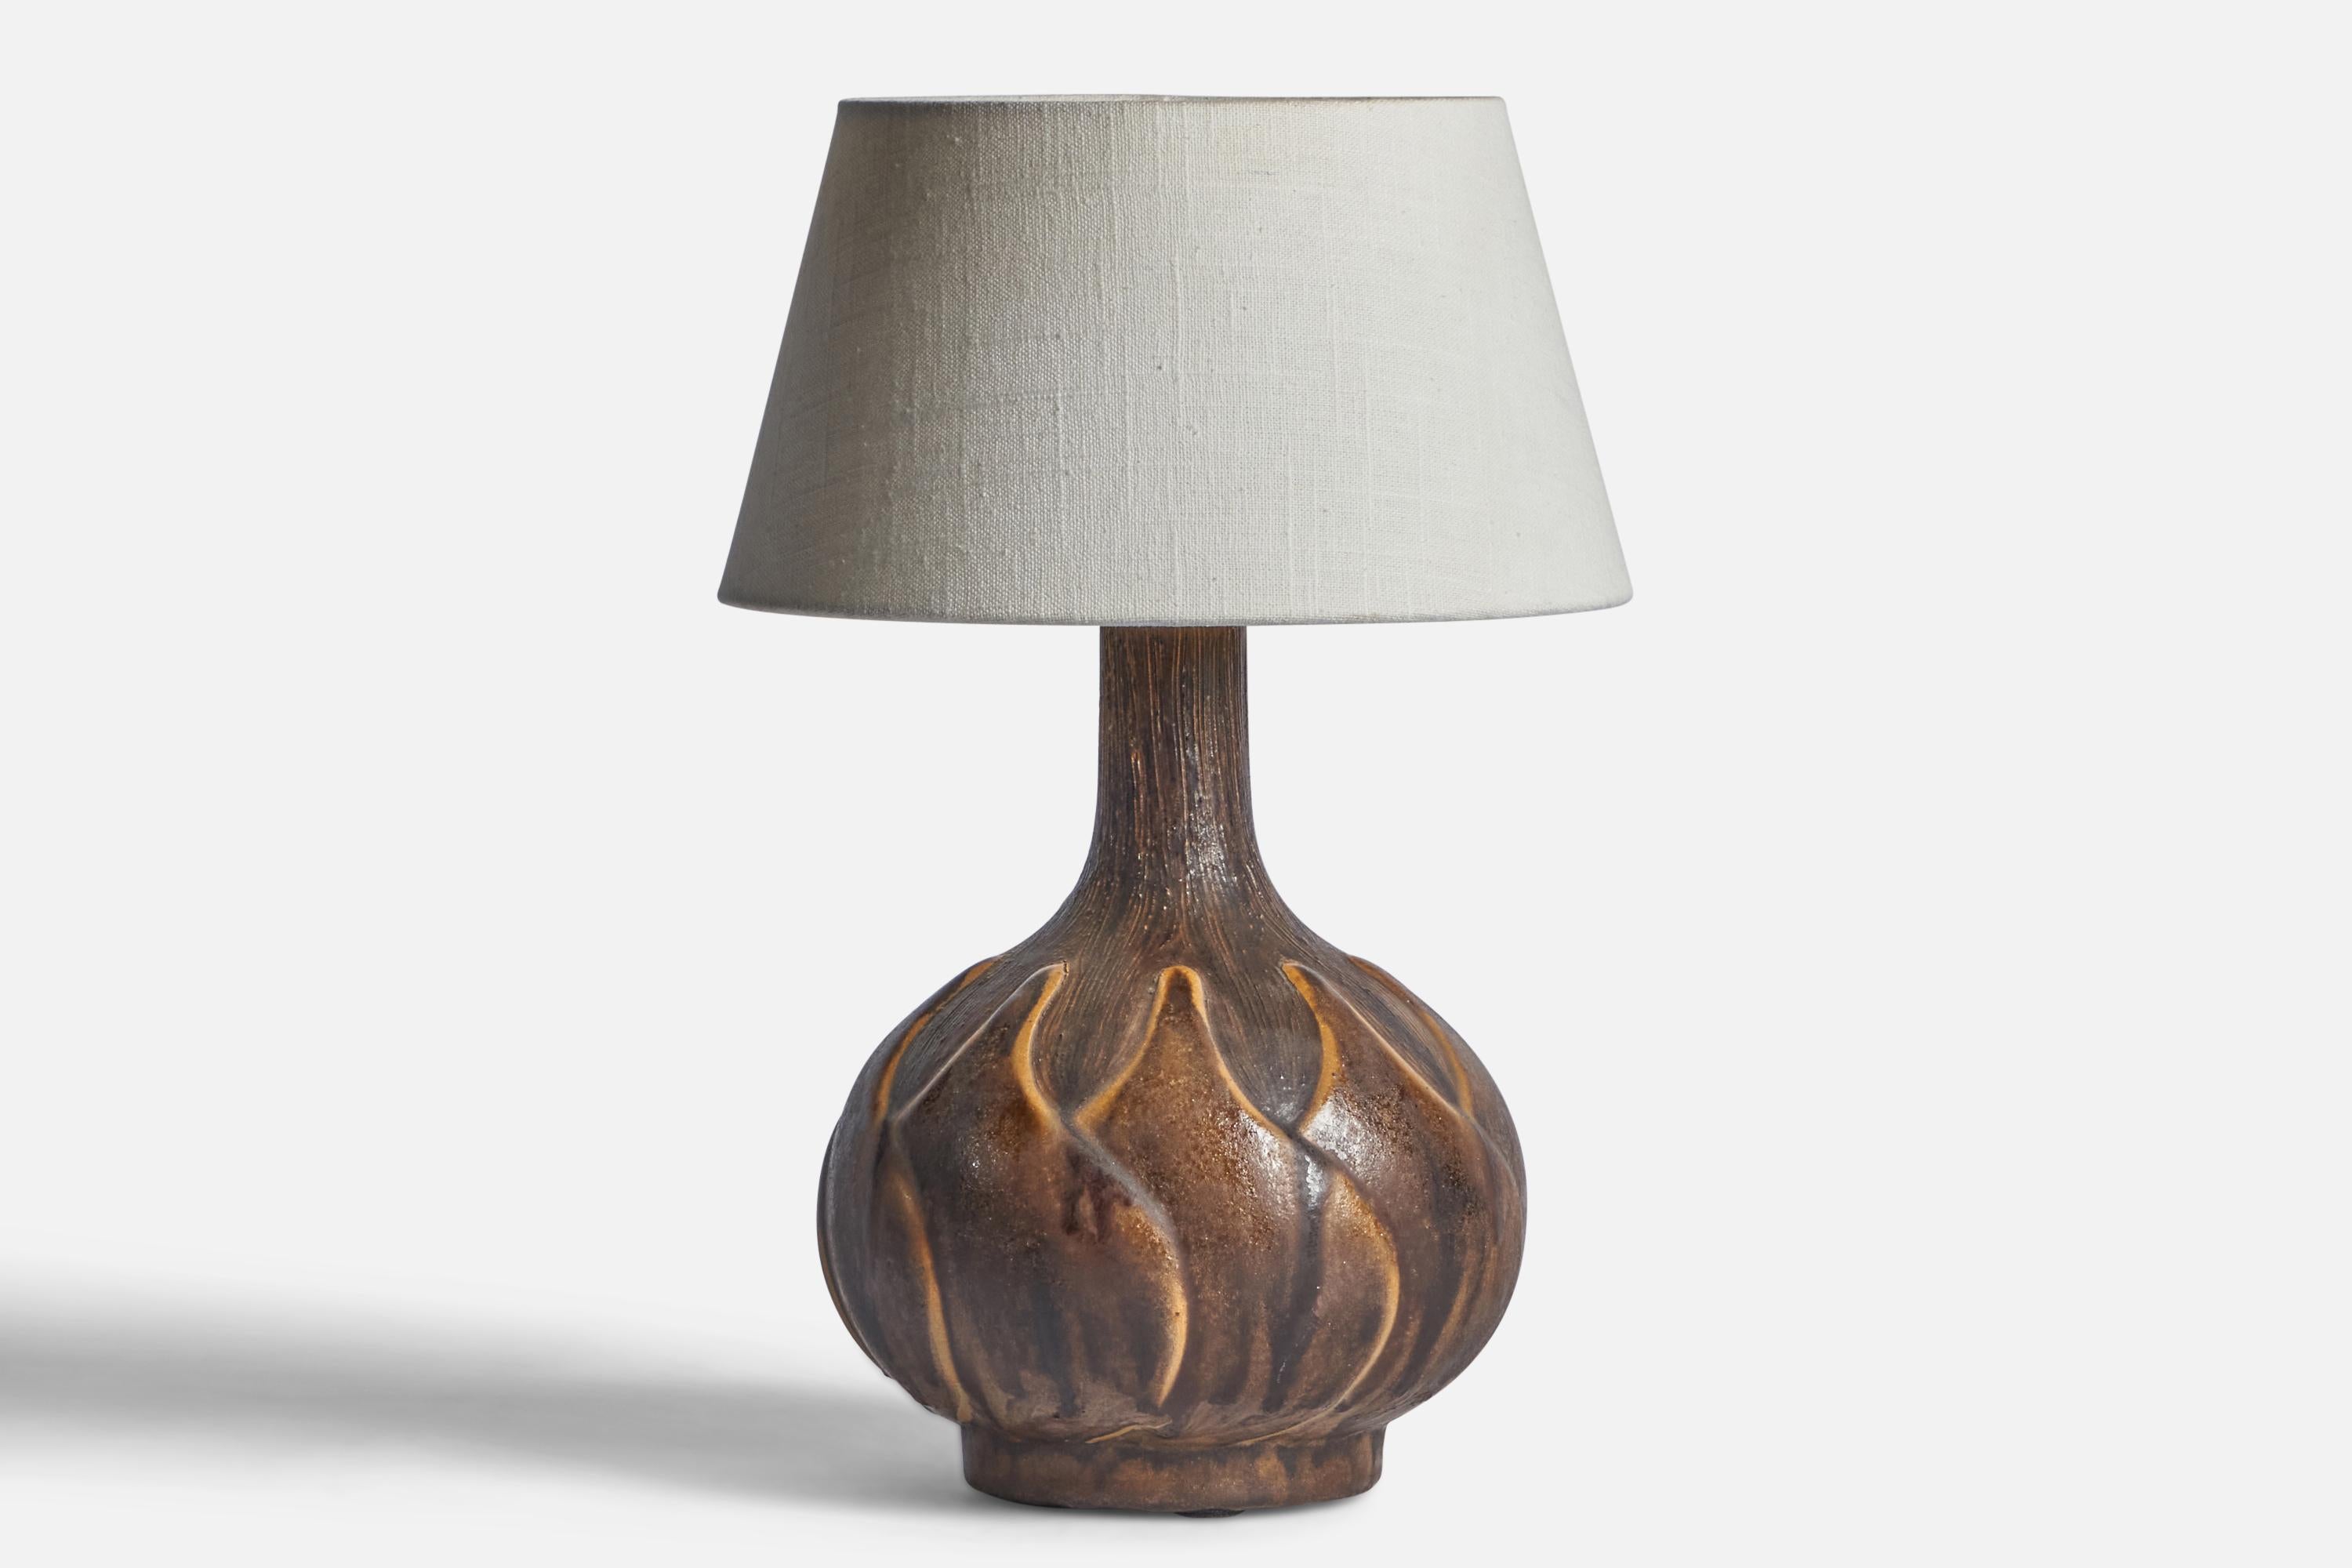 A brown-glazed ceramic table lamp designed and produced in Denmark, 1960s.

Dimensions of Lamp (inches): 12.35” H x 7.7” Diameter
Dimensions of Shade (inches): 7” Top Diameter x 10” Bottom Diameter x 5.5” H 
Dimensions of Lamp with Shade (inches):